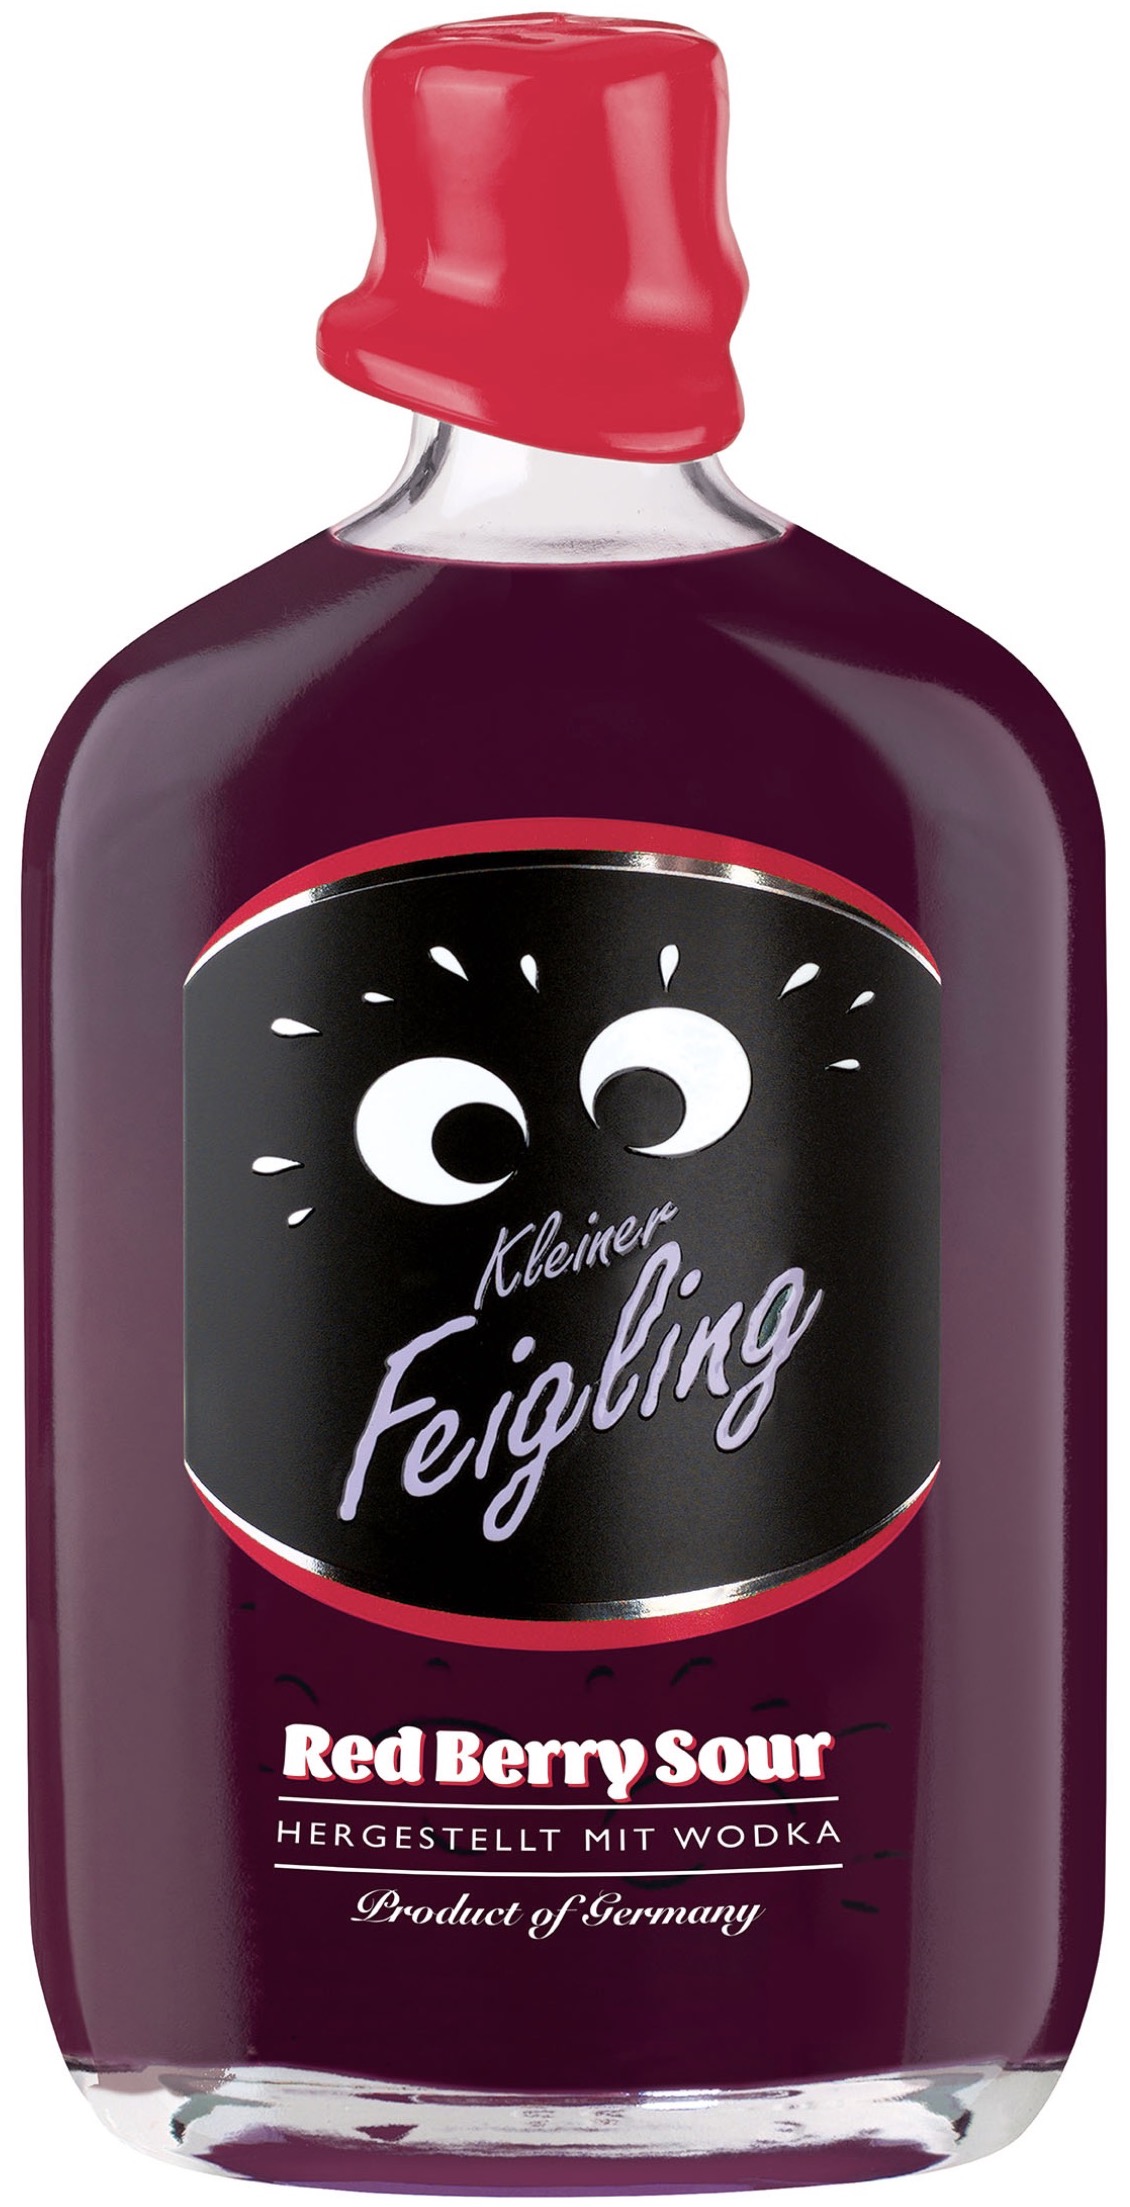 Kleiner Feigling Red Berry Sour 15% vol. 0,5L